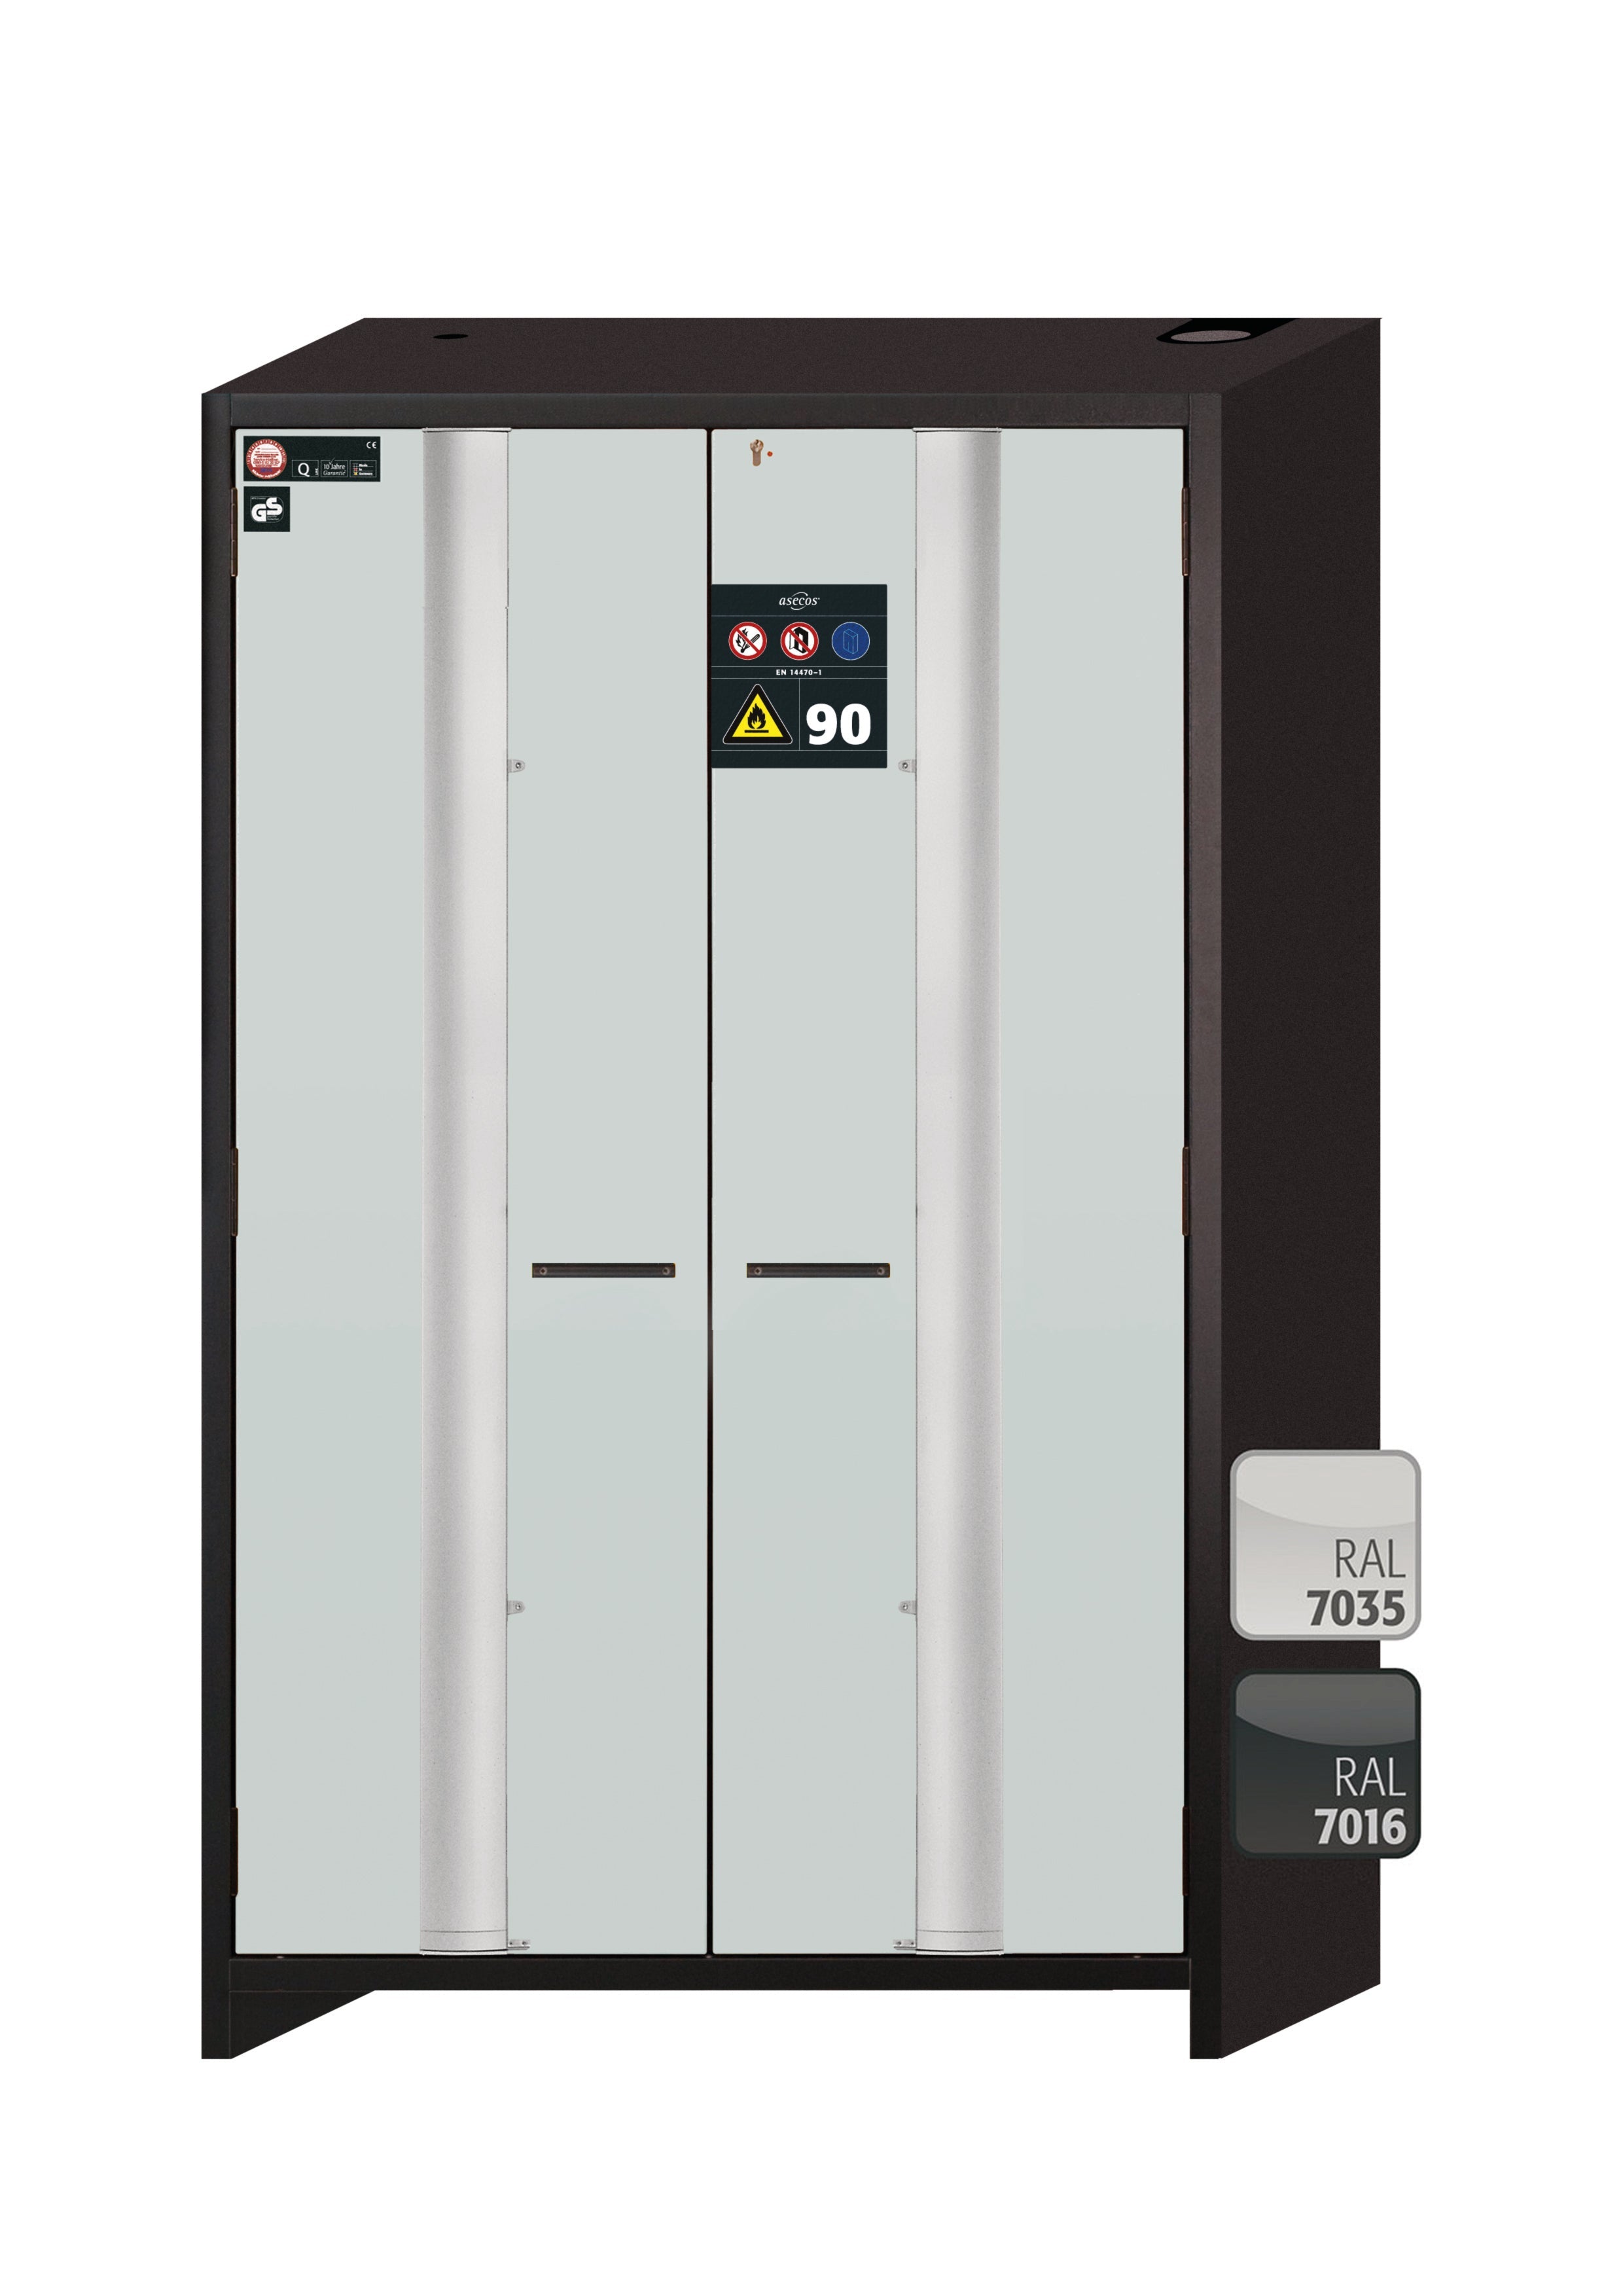 Type 90 safety cabinet Q-PHOENIX-90 model Q90.195.120.FD in light gray RAL 7035 with 3x standard pull-out tray (stainless steel 1.4301)